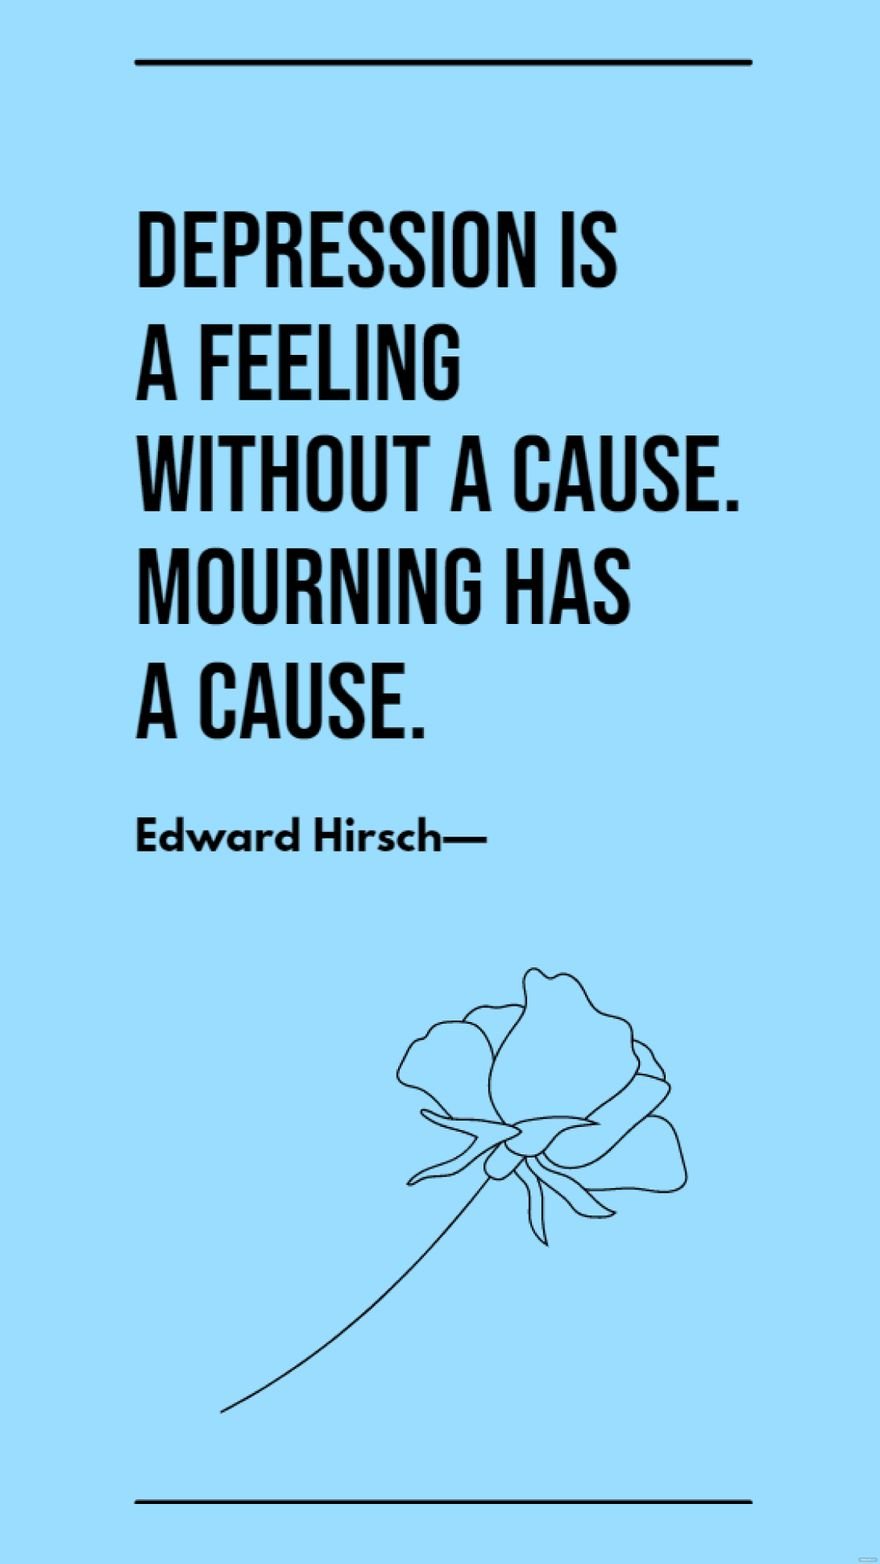 Edward Hirsch - Depression is a feeling without a cause. Mourning has a cause. Template